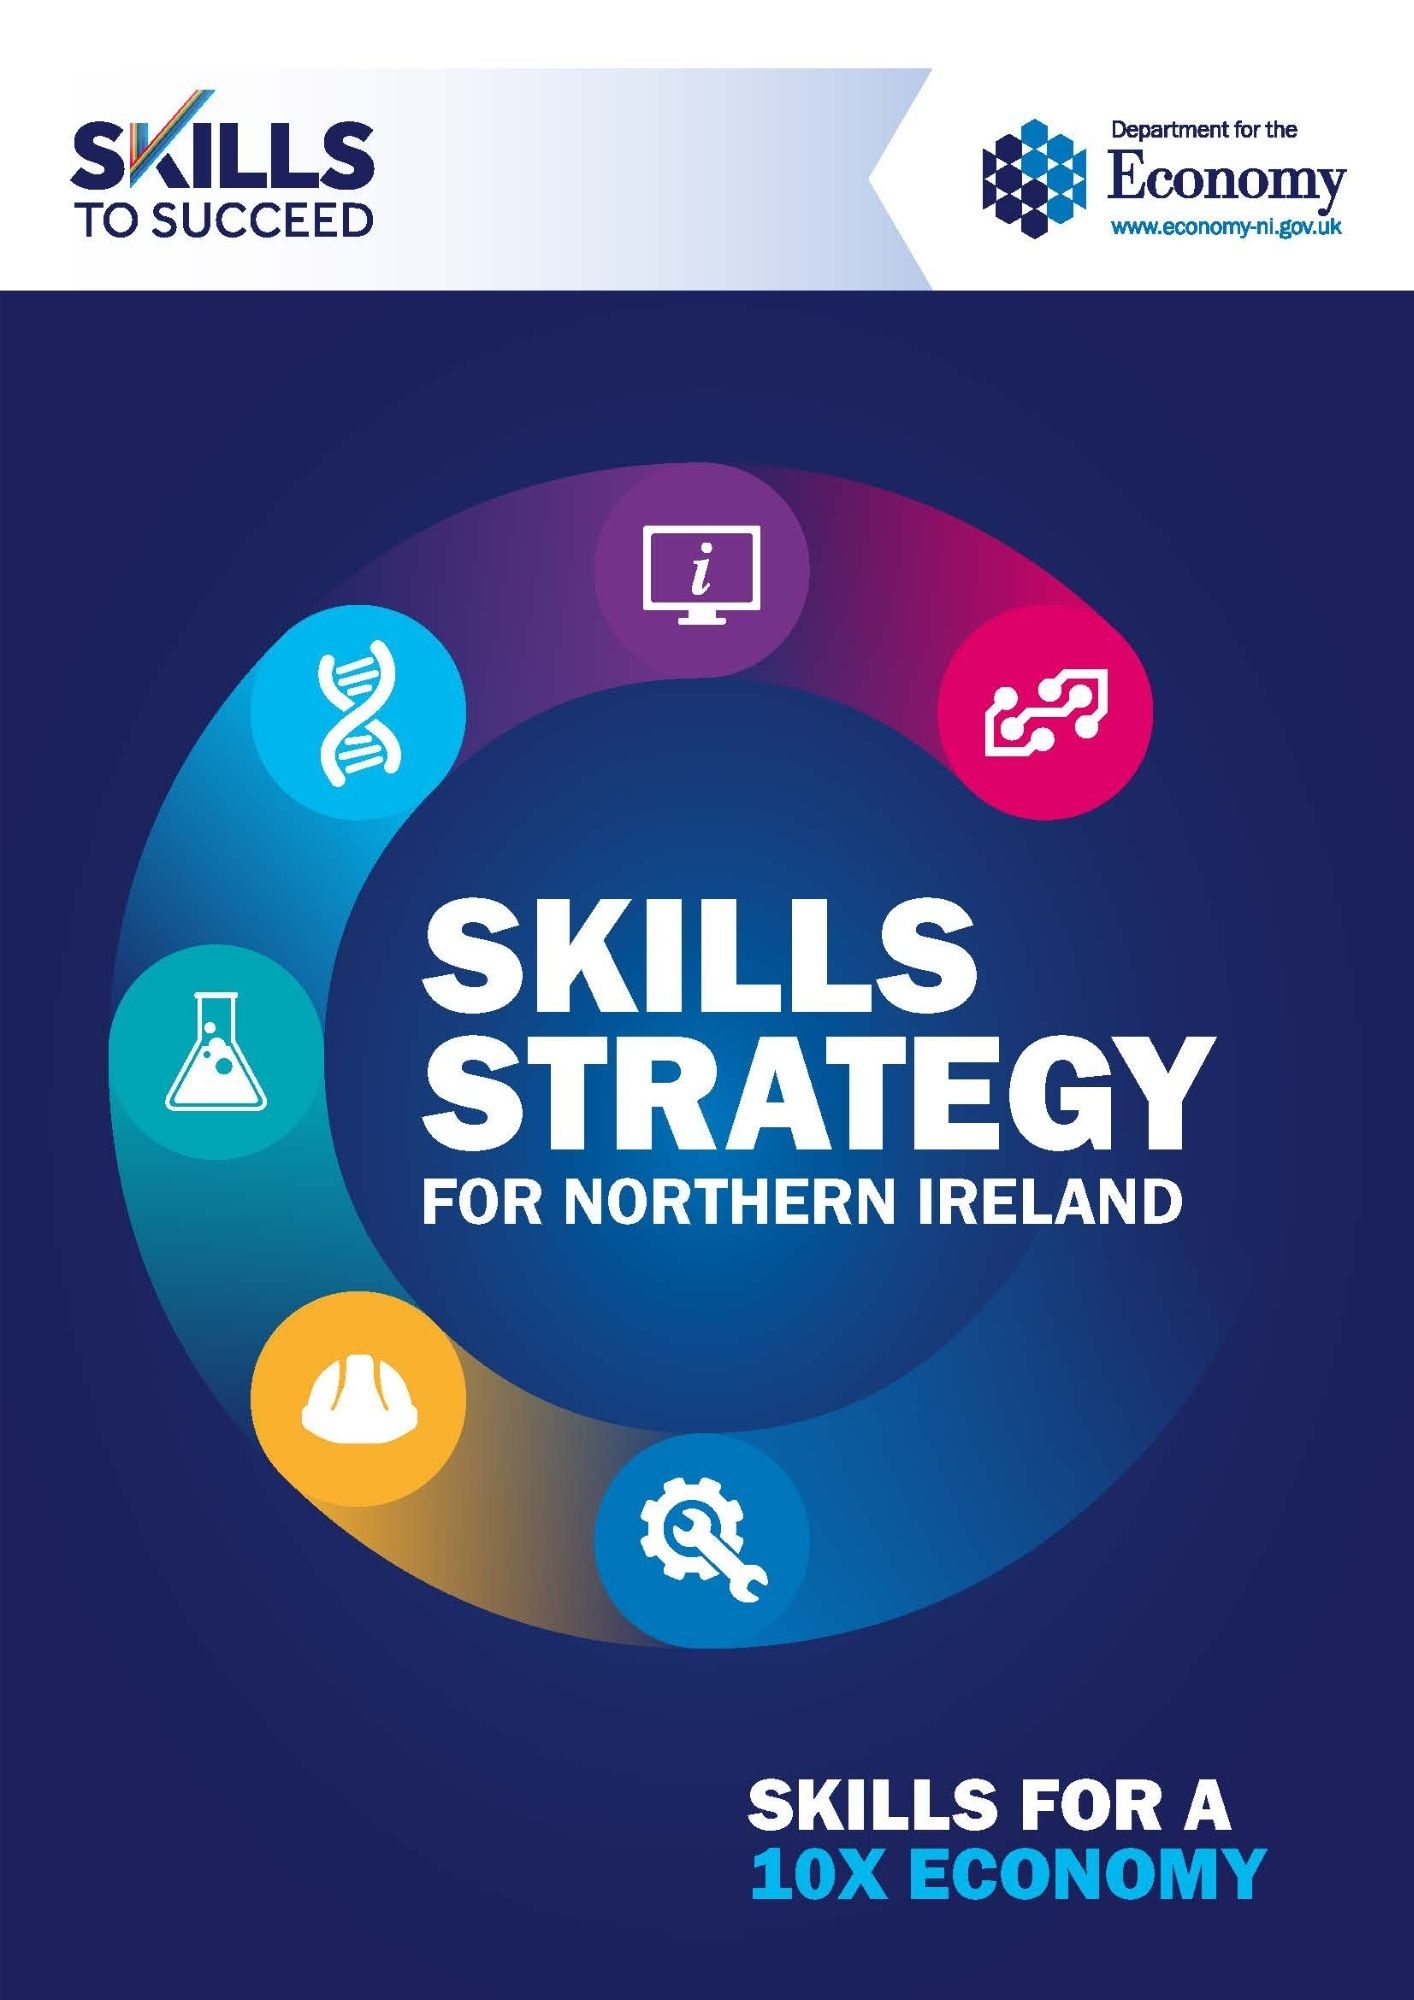 The Skills Strategy informs the Action Plan